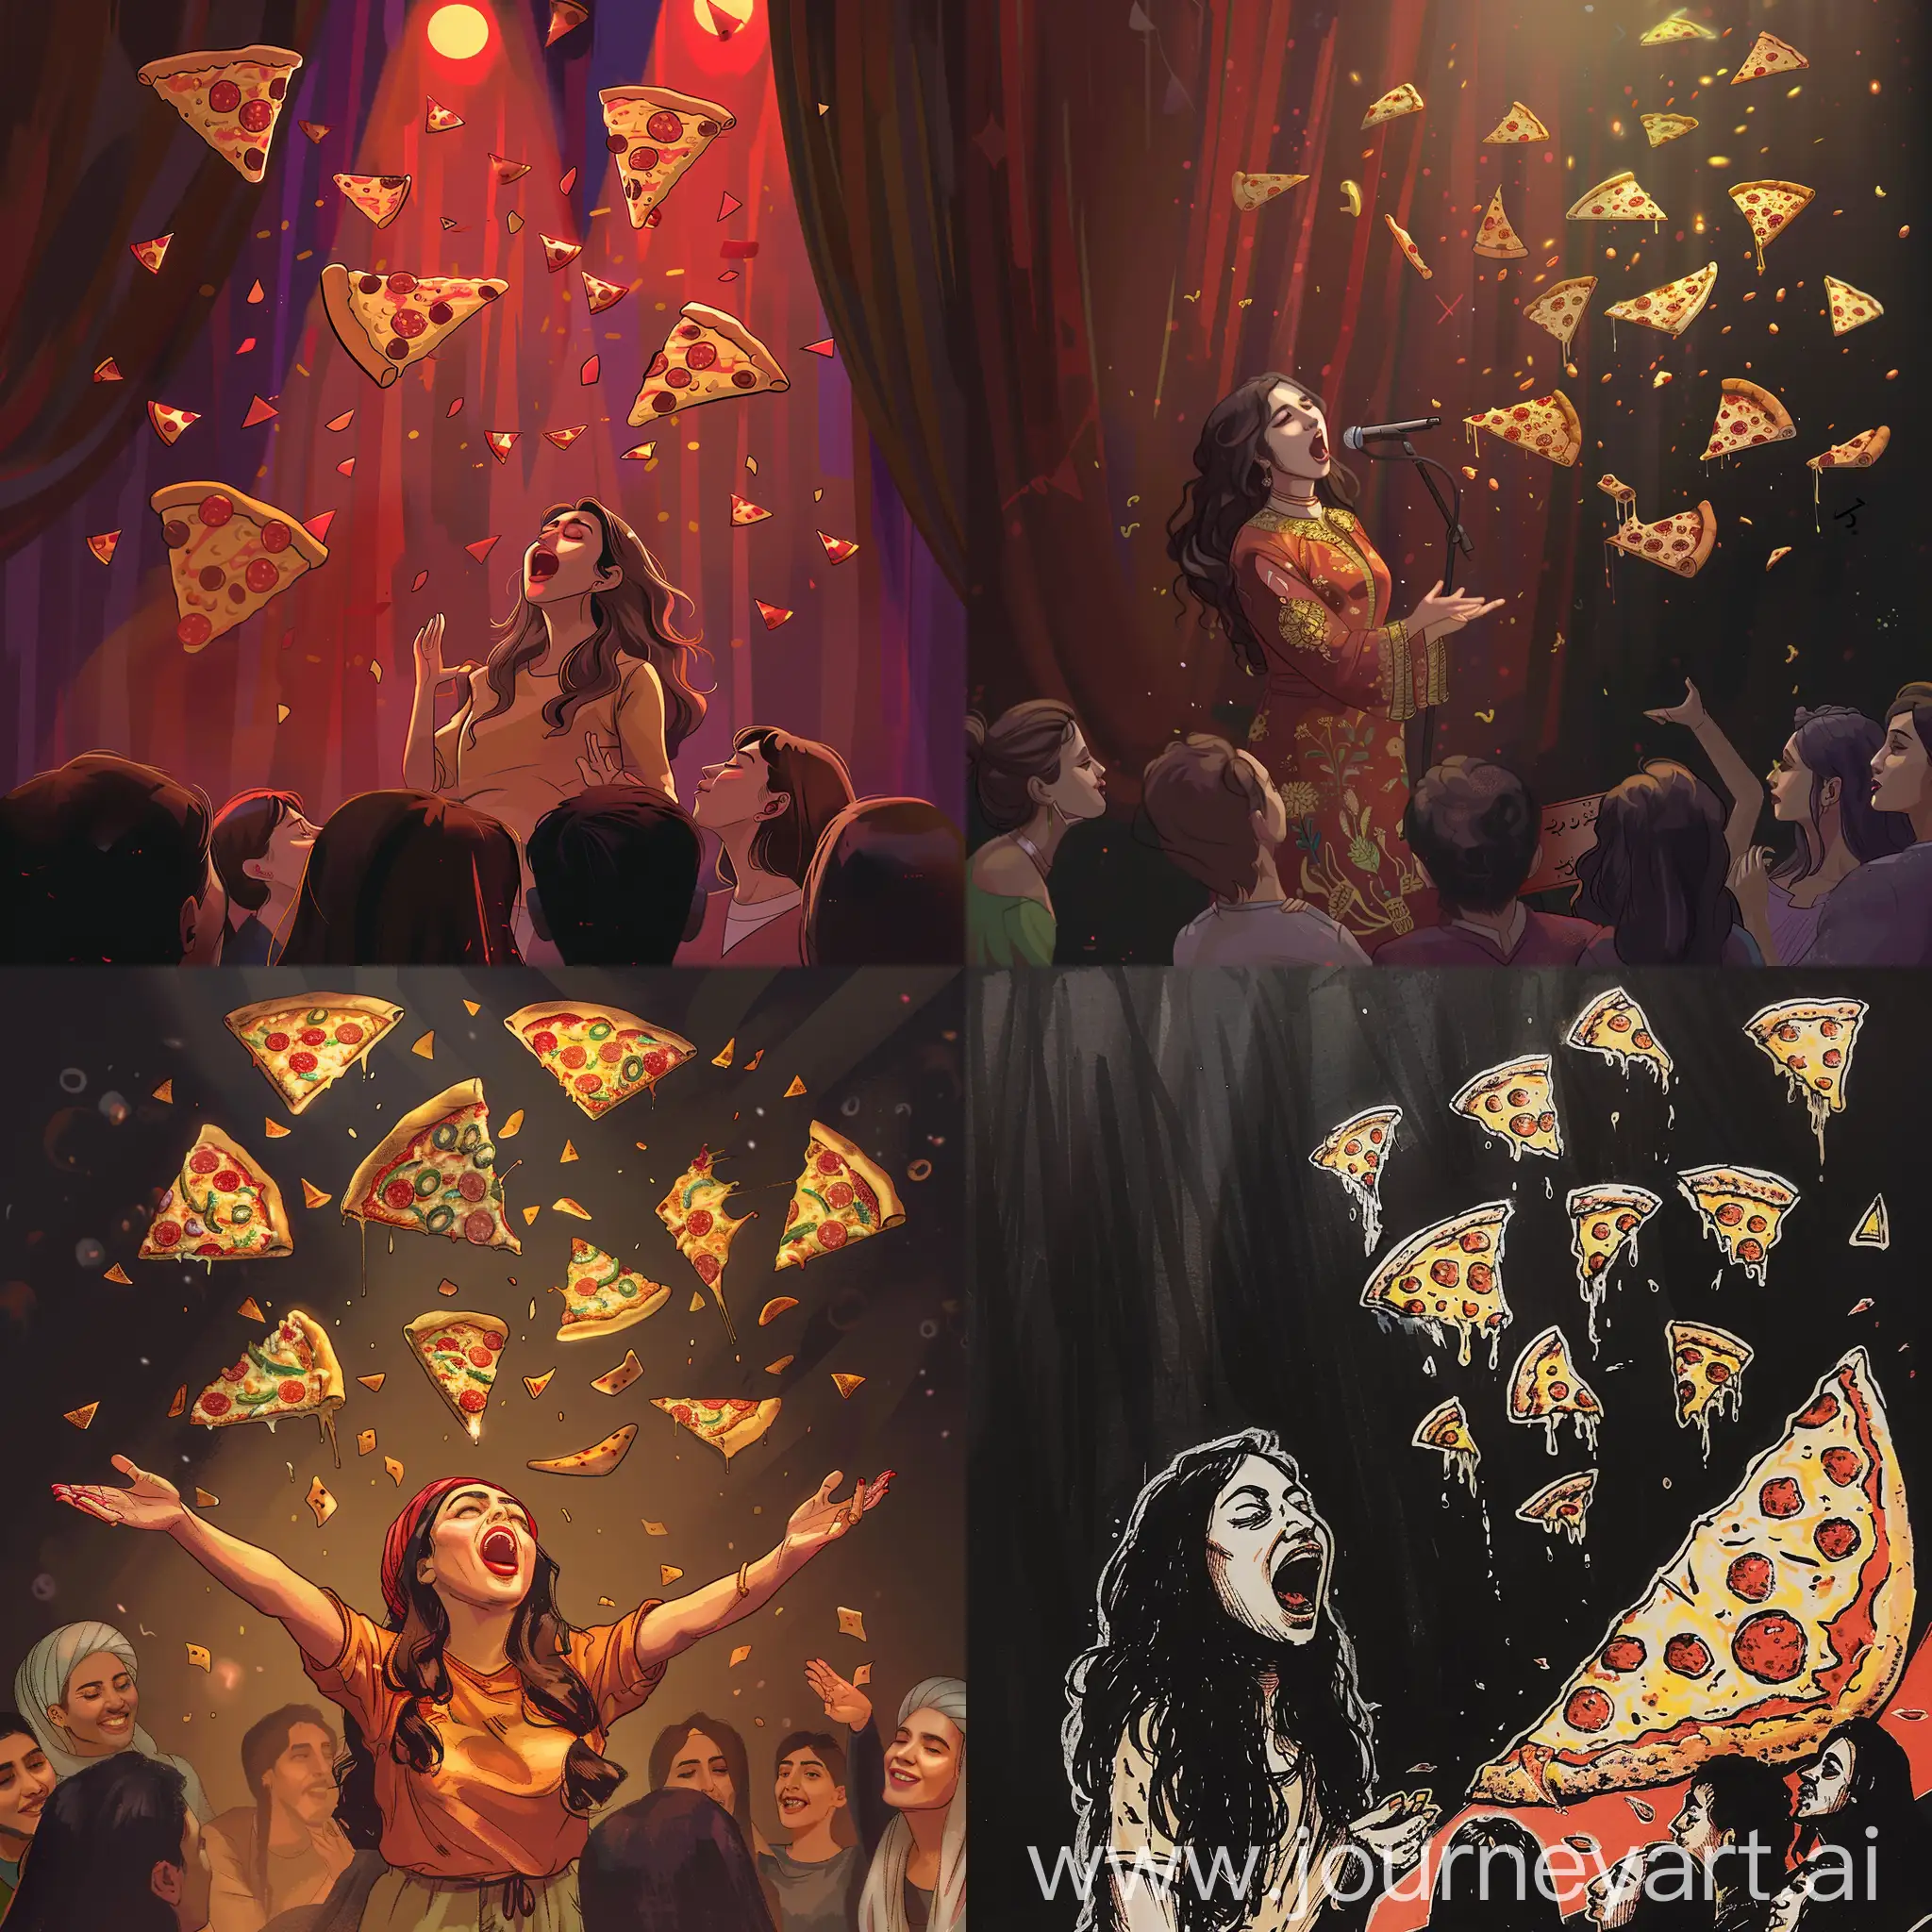 Iranian-Female-Singer-Performing-with-Pizza-Rain-for-Audience-Delight